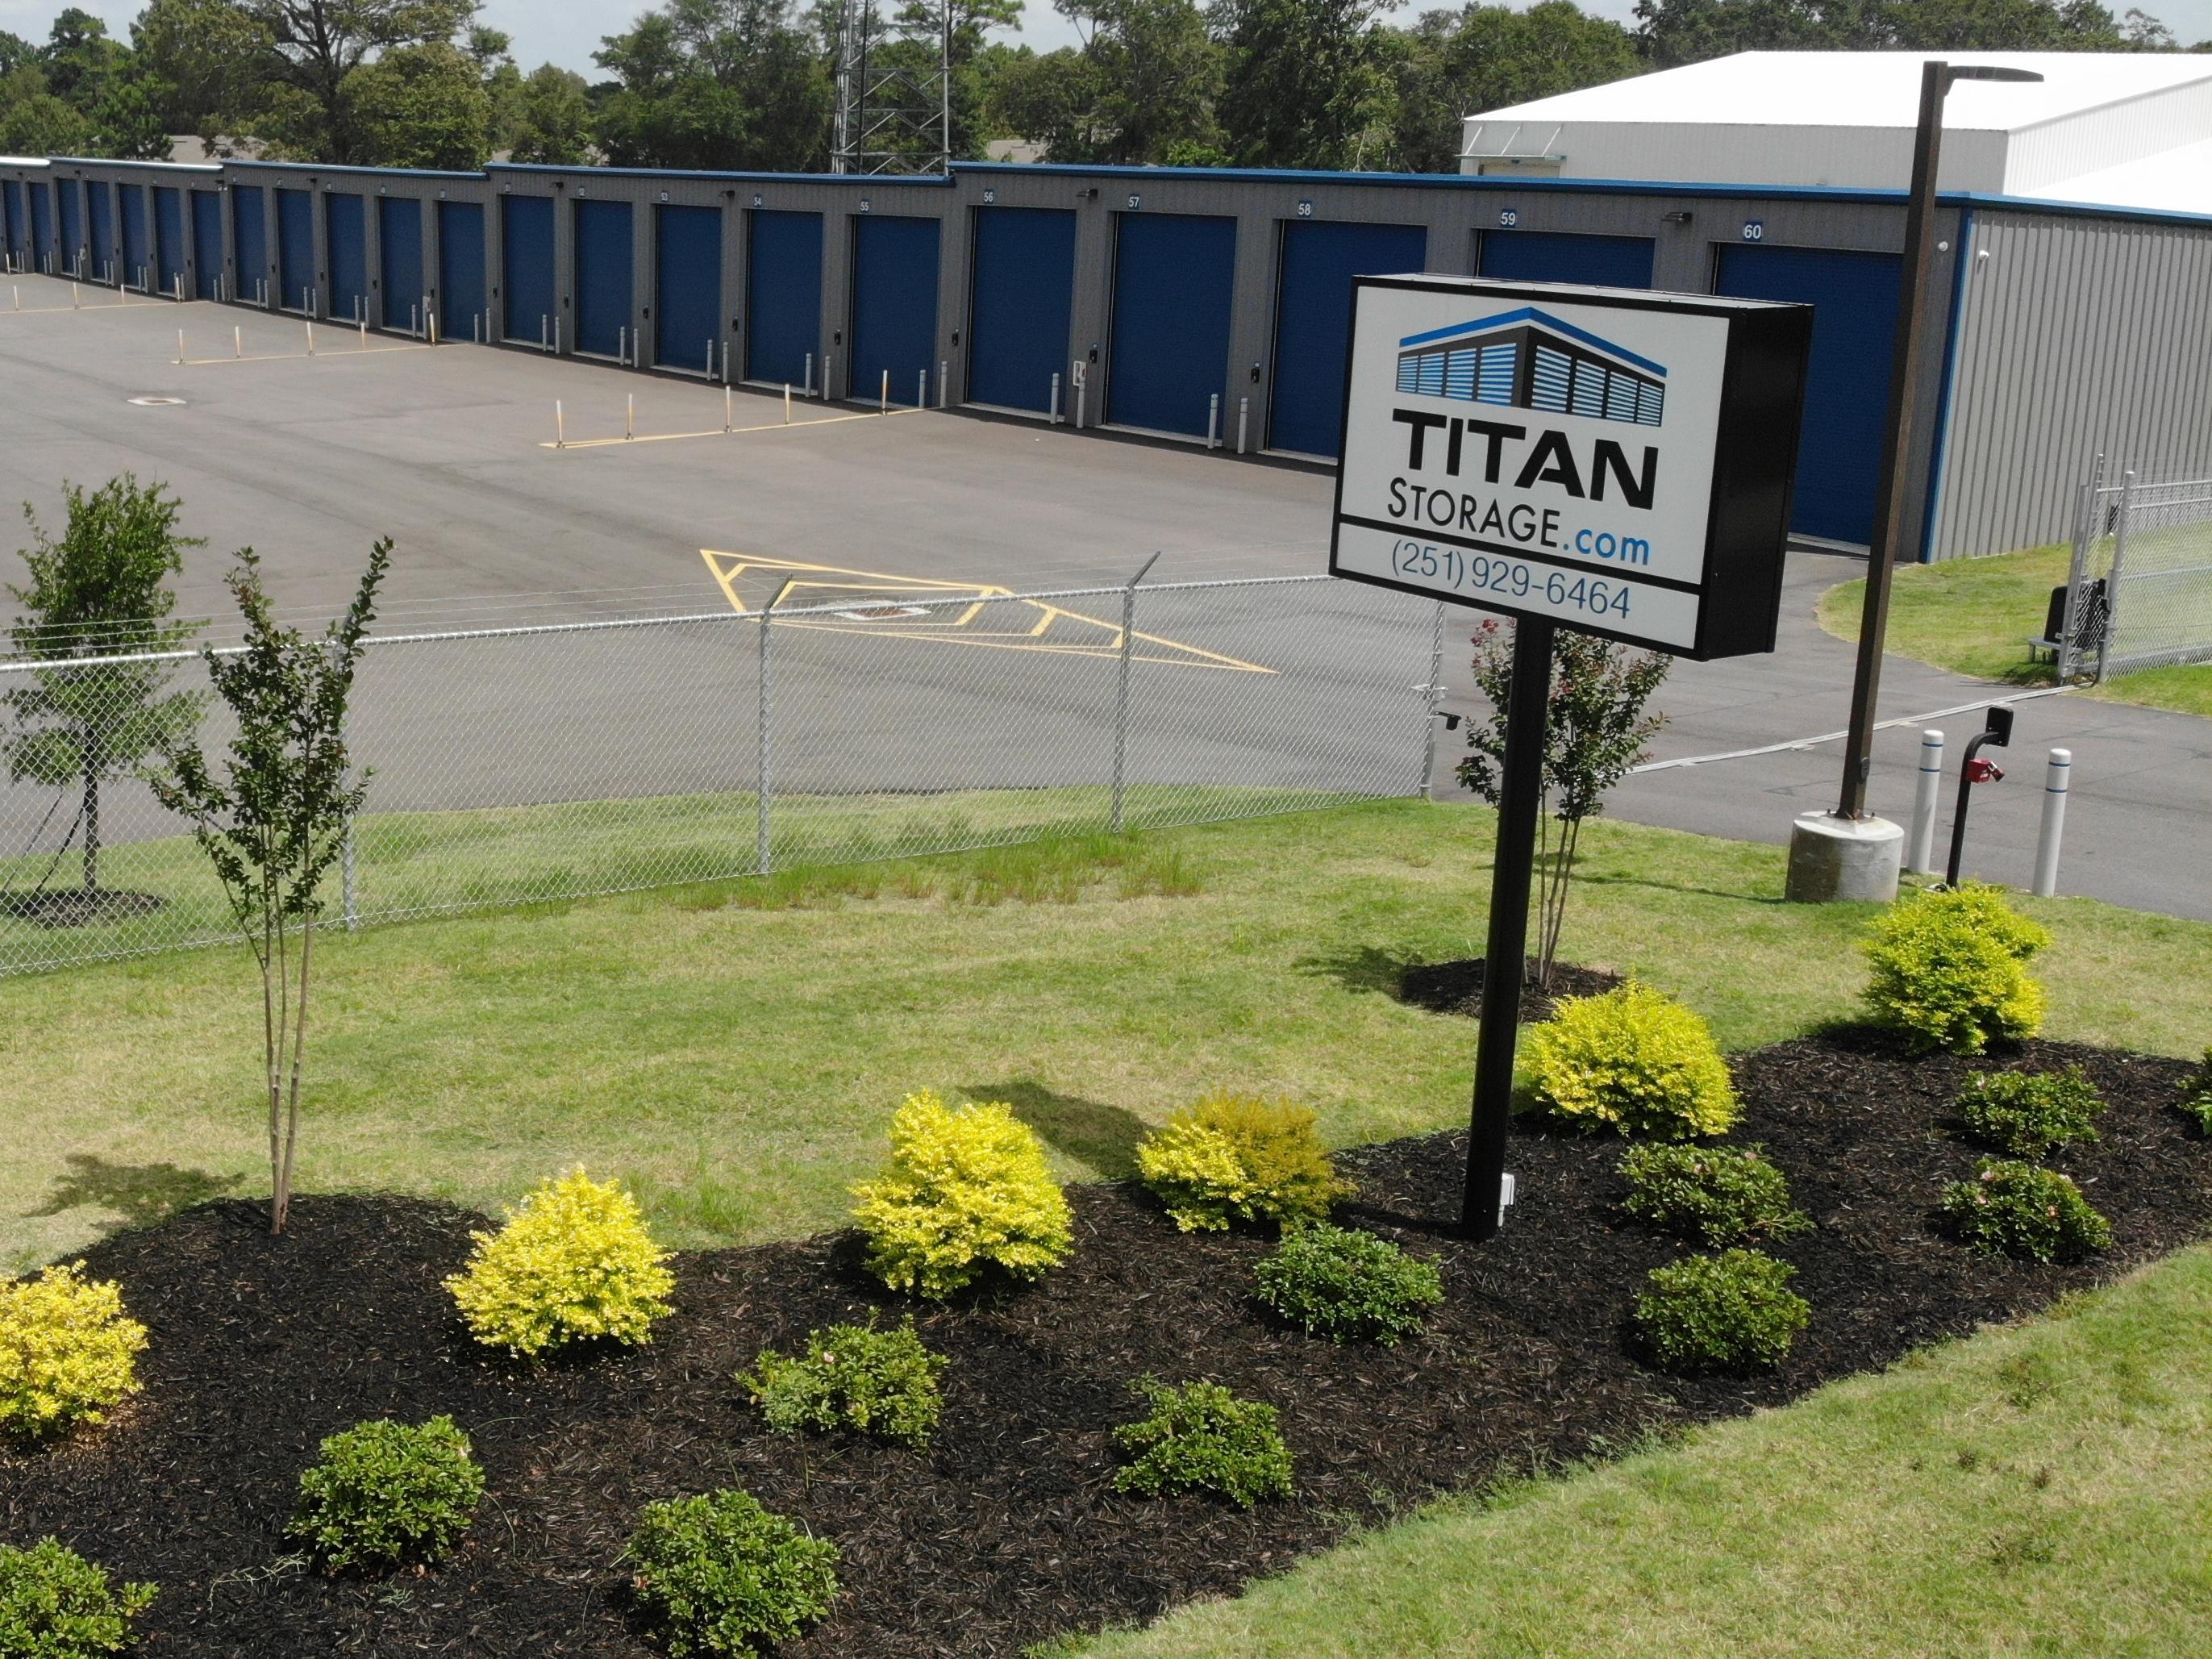 GET IN TOUCH WITH TITAN STORAGE FOR YOUR Mobile, AL RV STORAGE UNIT SOLUTION